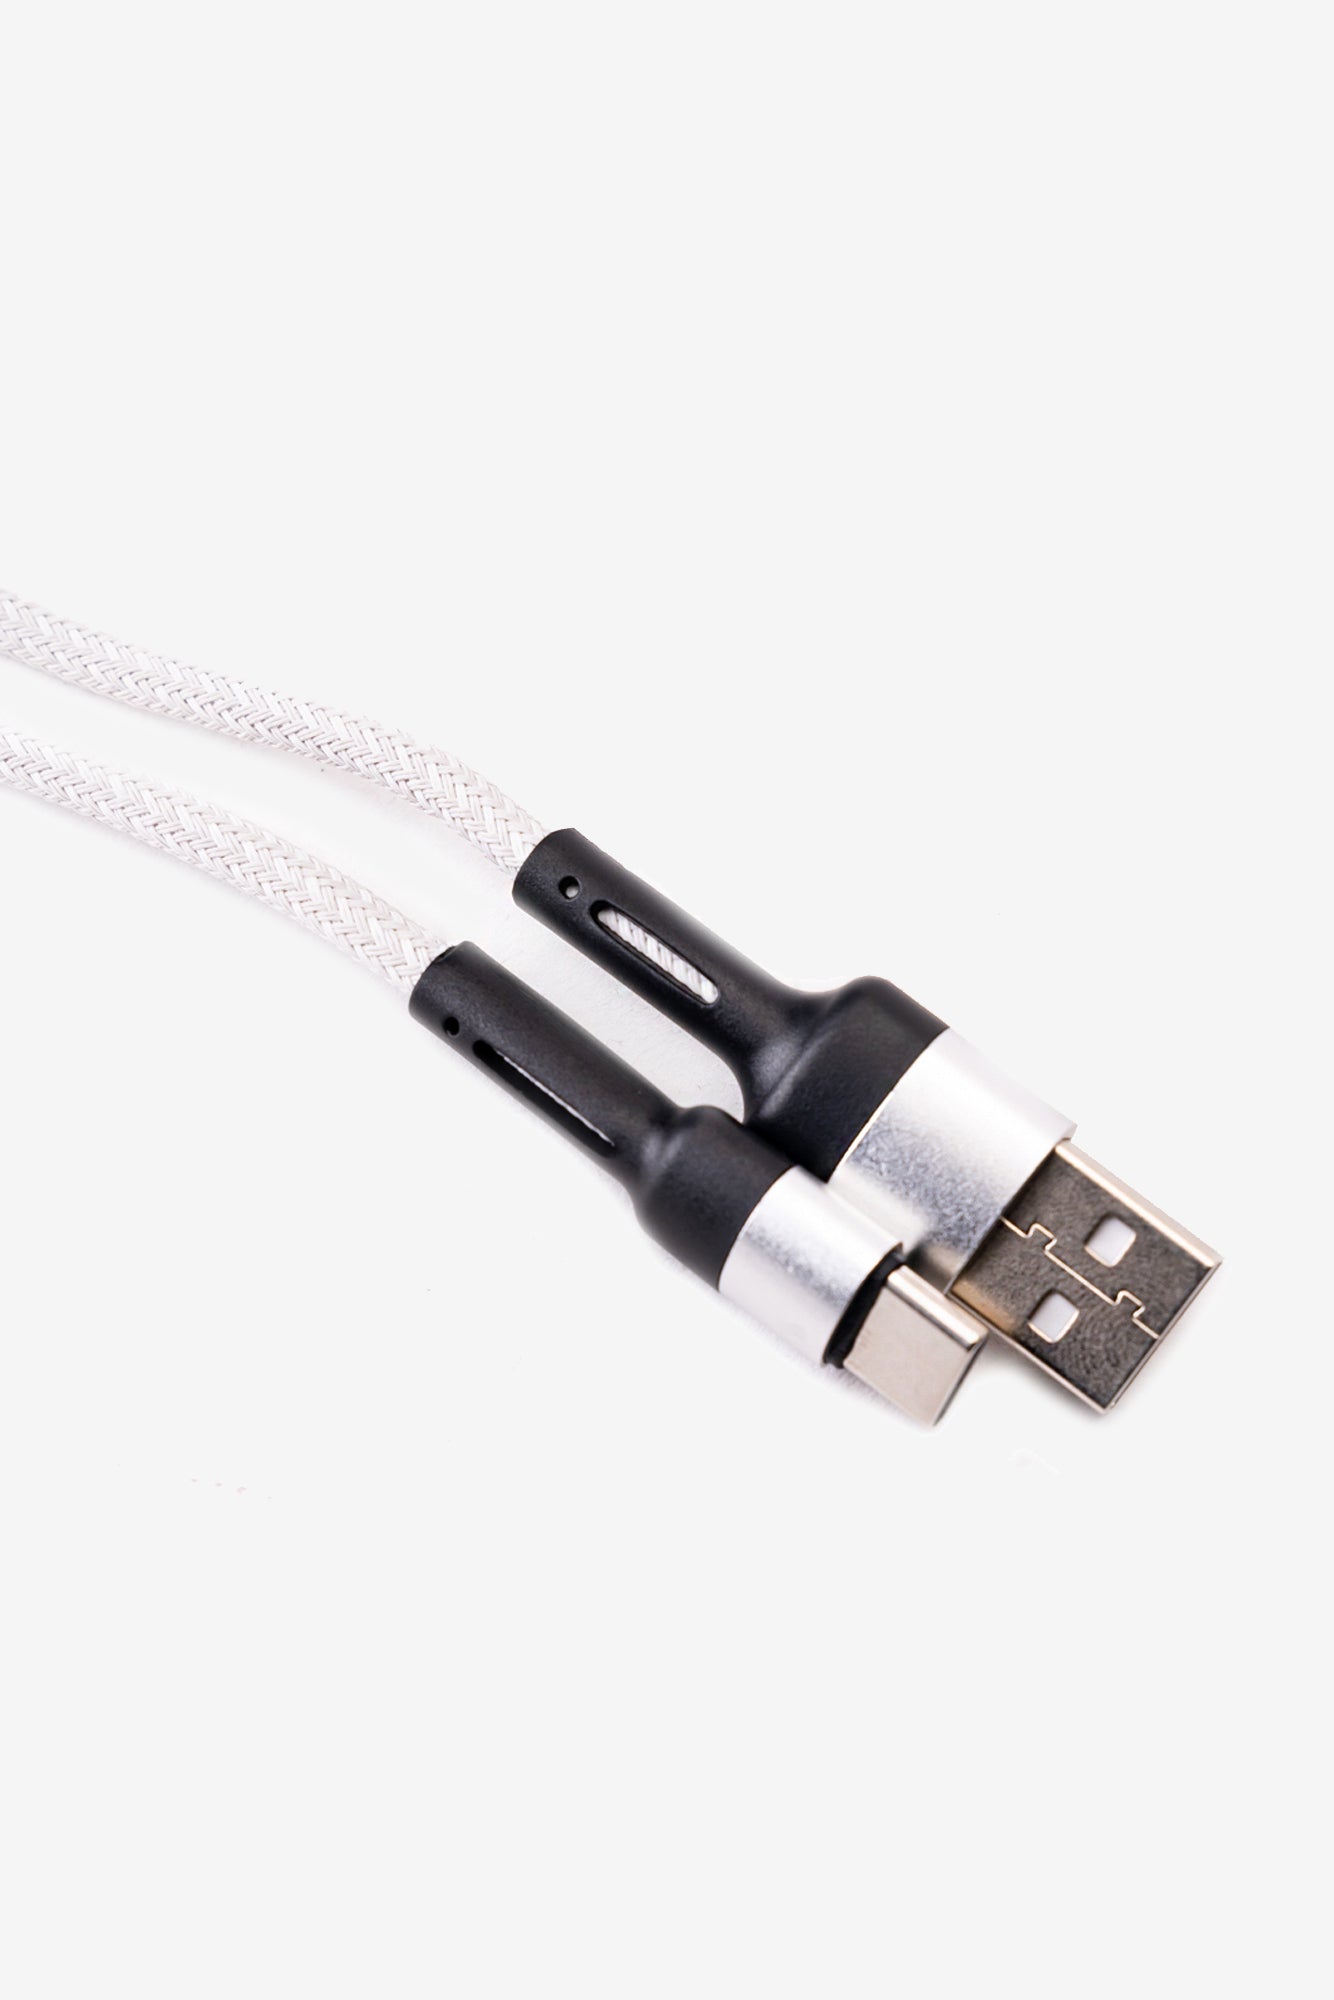 Cable USB - Tipo C Chinitown Chinitown